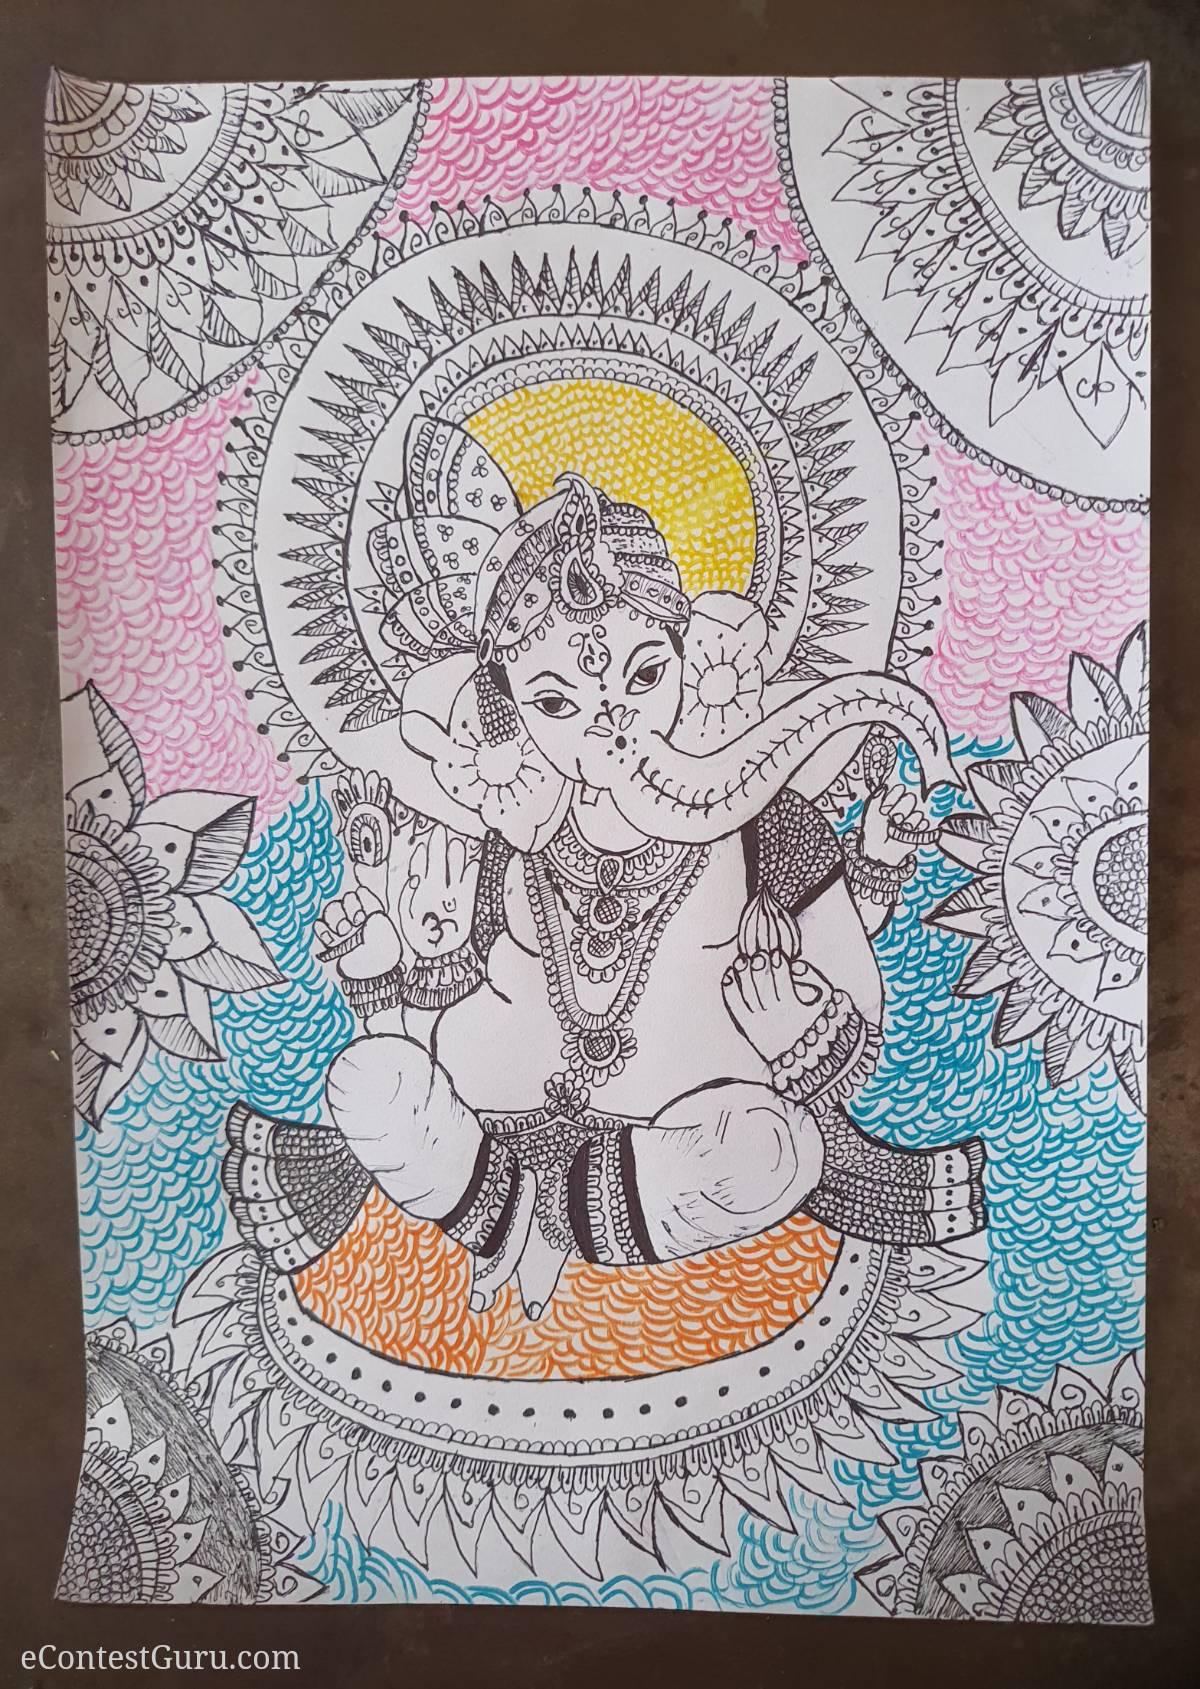 Ganesh: The remover of obstacles 